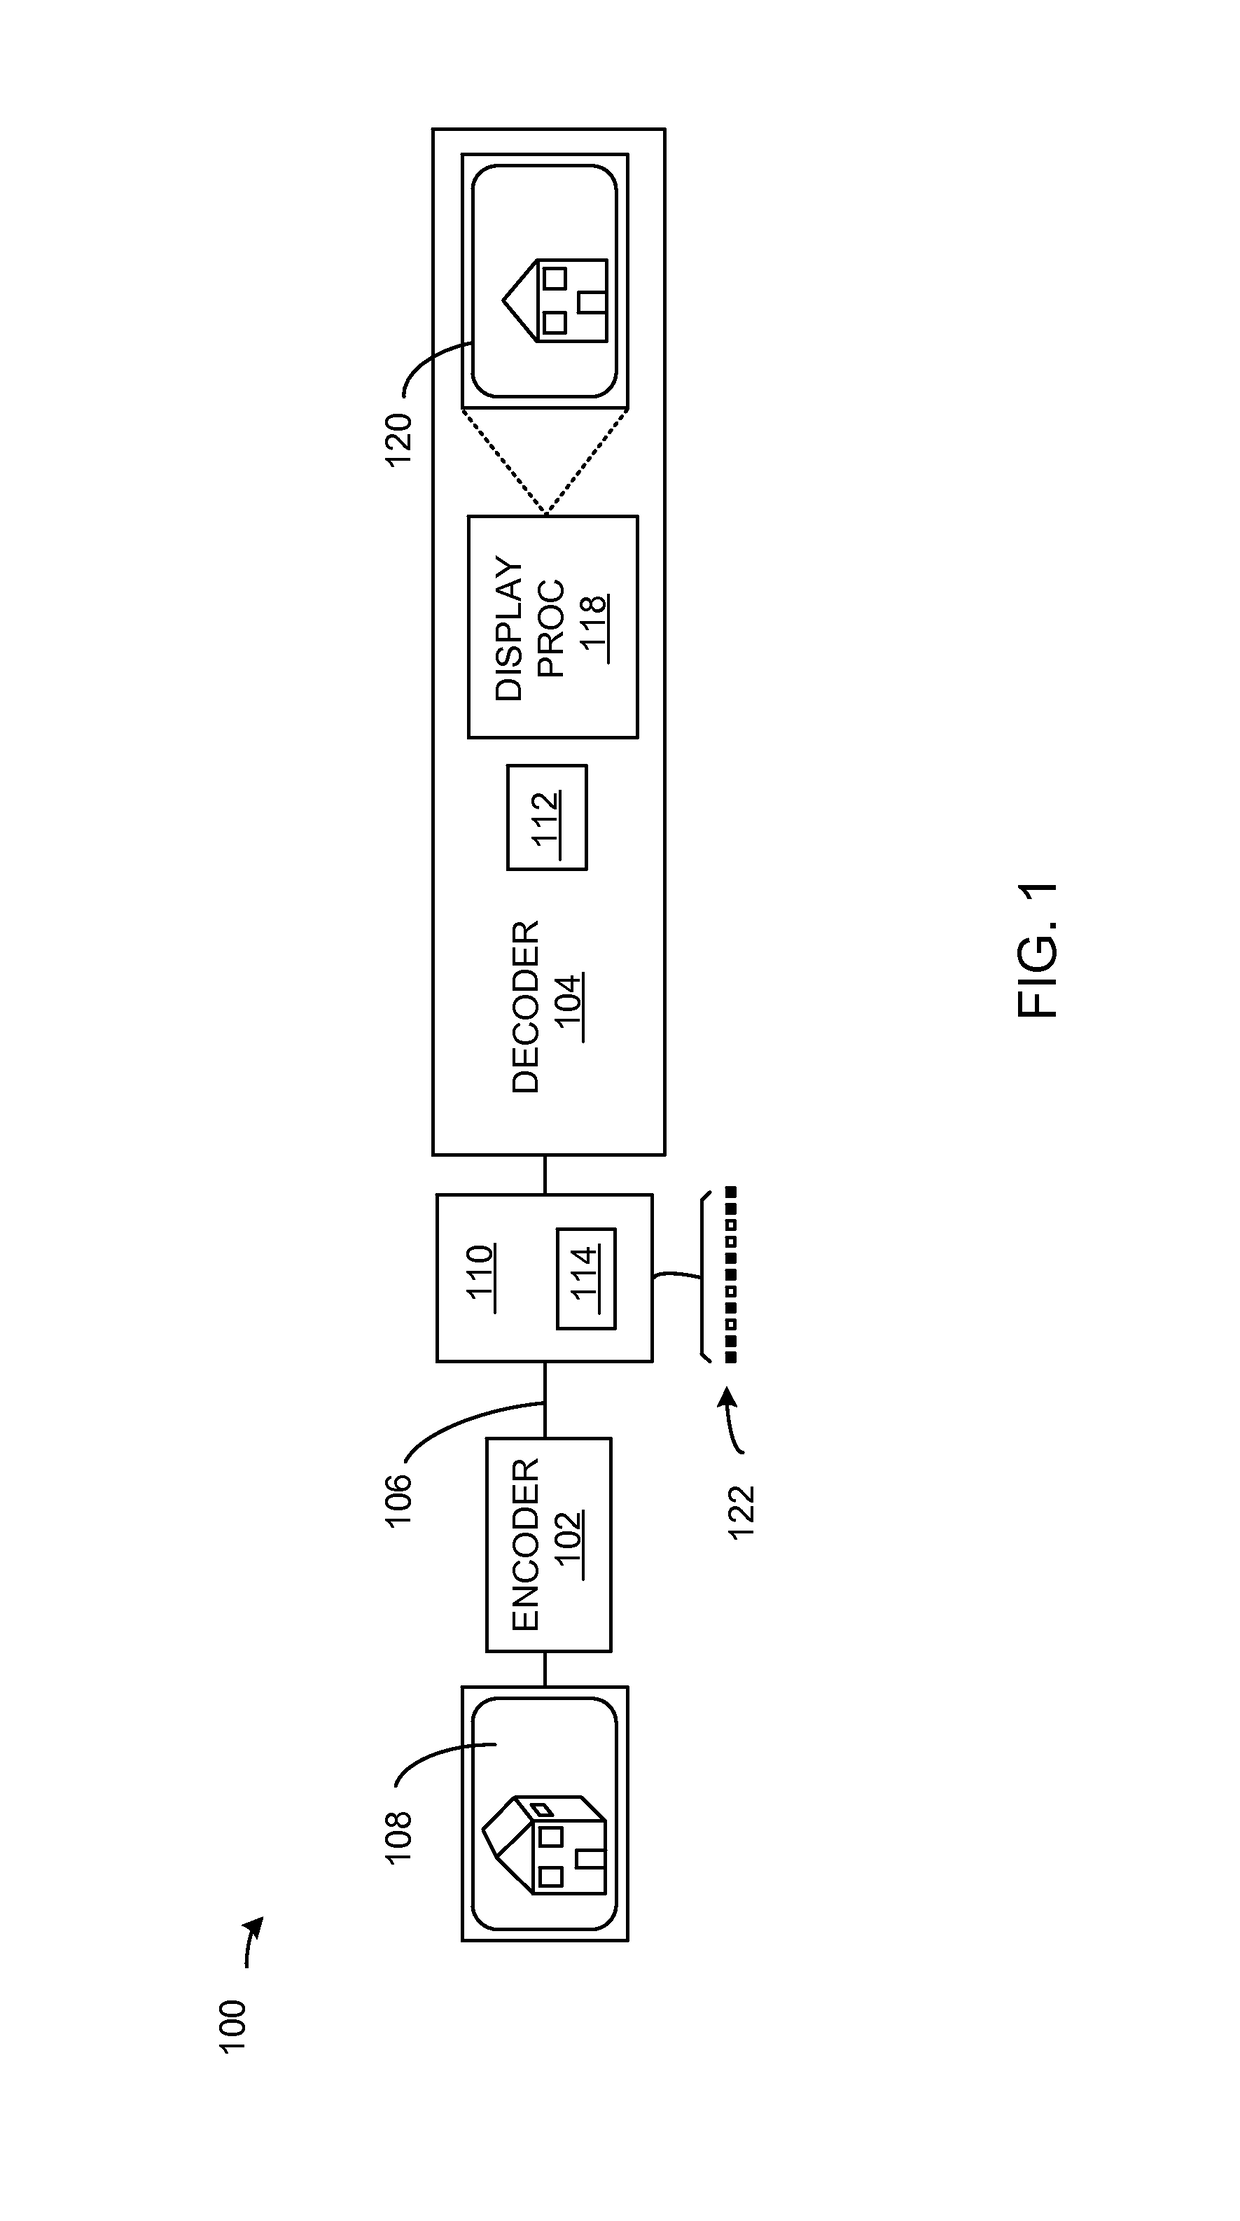 Video coding system with low delay and method of operation thereof